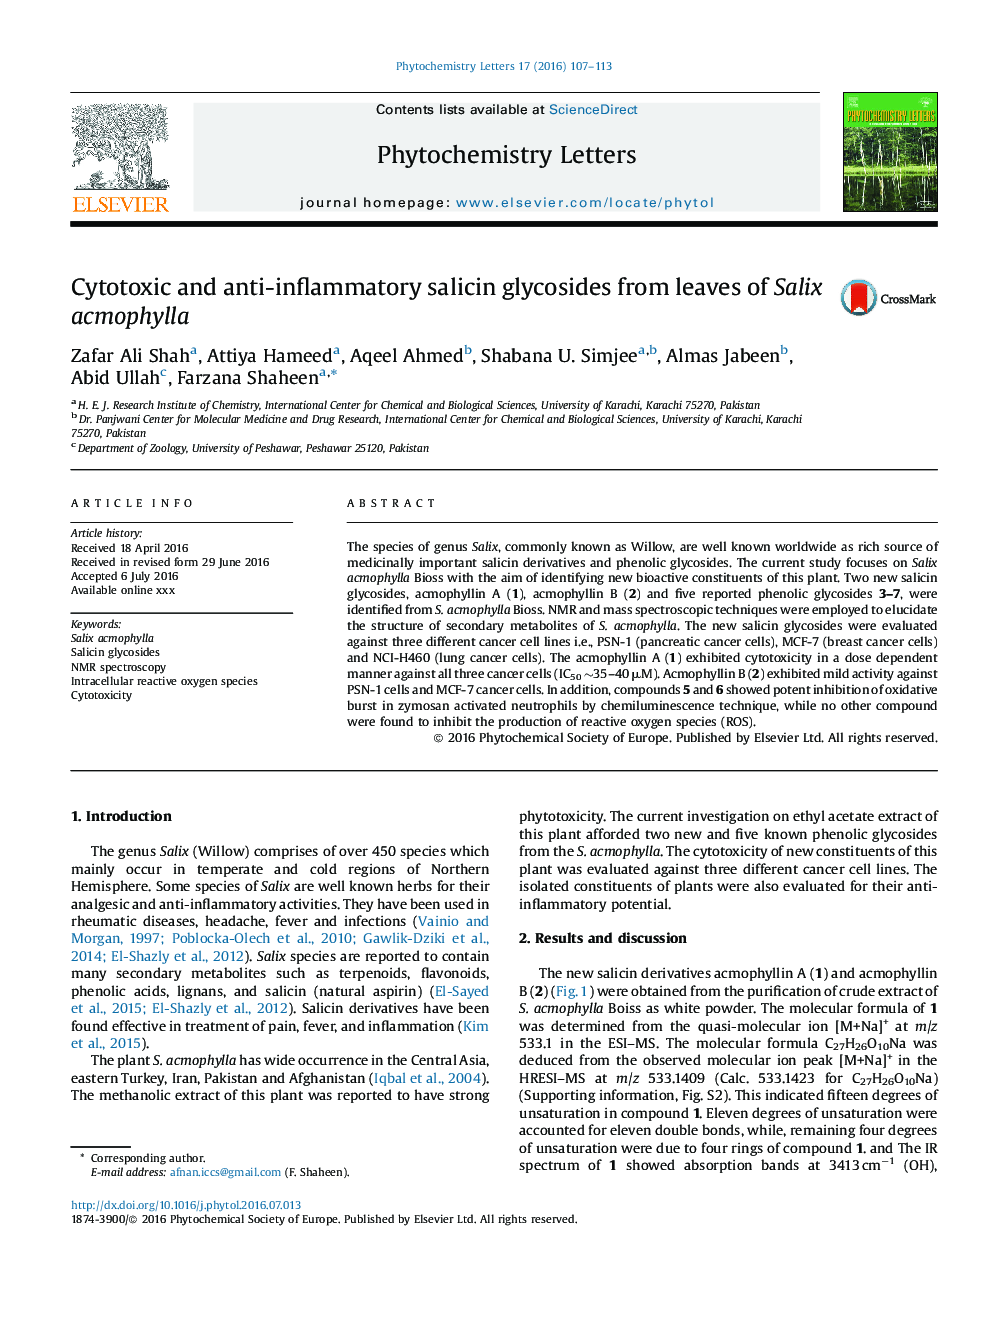 Cytotoxic and anti-inflammatory salicin glycosides from leaves of Salix acmophylla